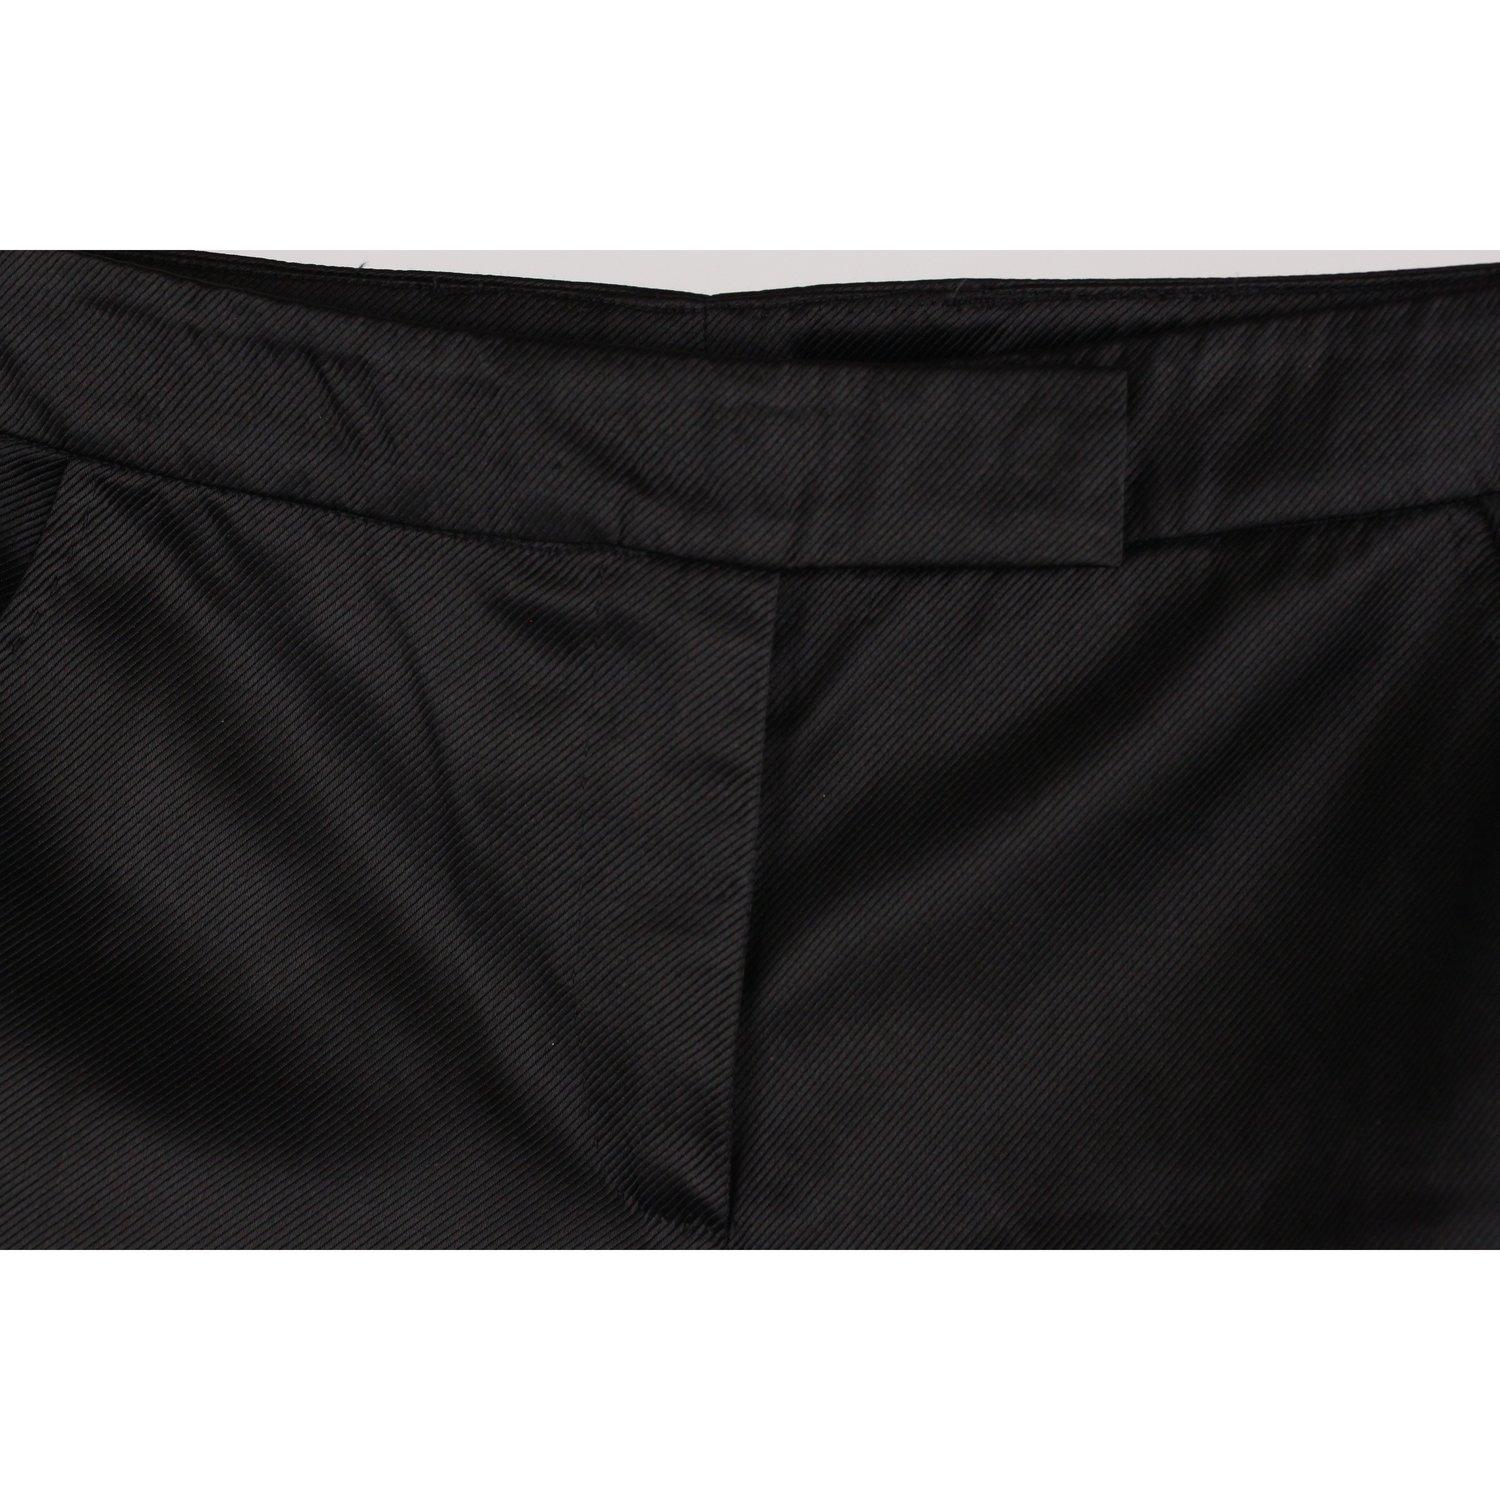 MATERIAL: Acetate COLOR: Black MODEL: Trousers GENDER: Women SIZE: Small COUNTRY OF MANUFACTURE: Italy Condition CONDITION DETAILS: A :EXCELLENT CONDITION - Used once or twice. Looks mint. Imperceptible signs of wear may be present due to storage